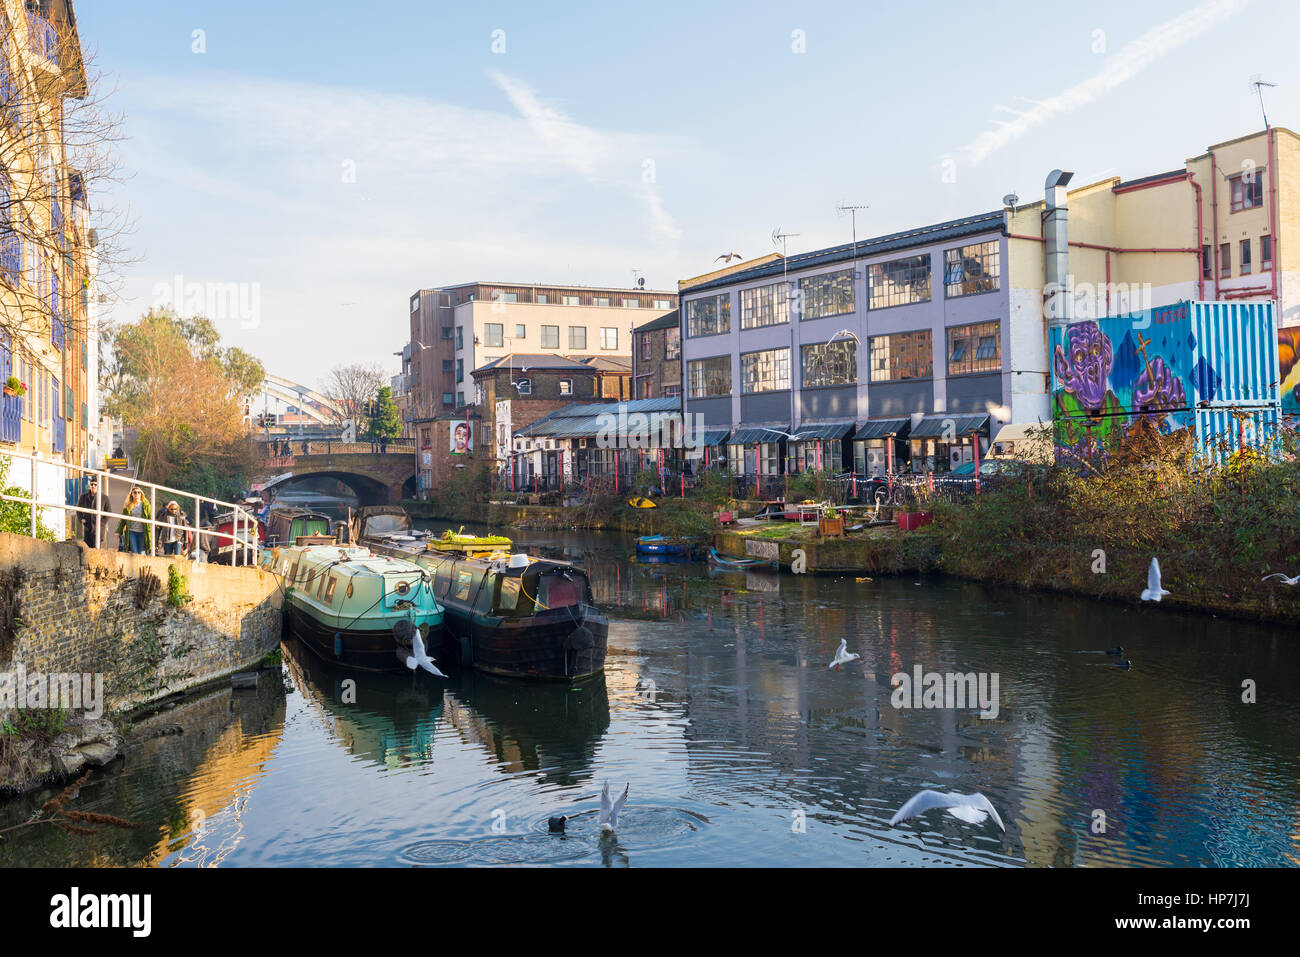 Haggerston, London, UK - 22 January 2017. The Haggerston Riviera in east London. Regent's Canal in Haggerston with boats and popular hipster venues on Stock Photo